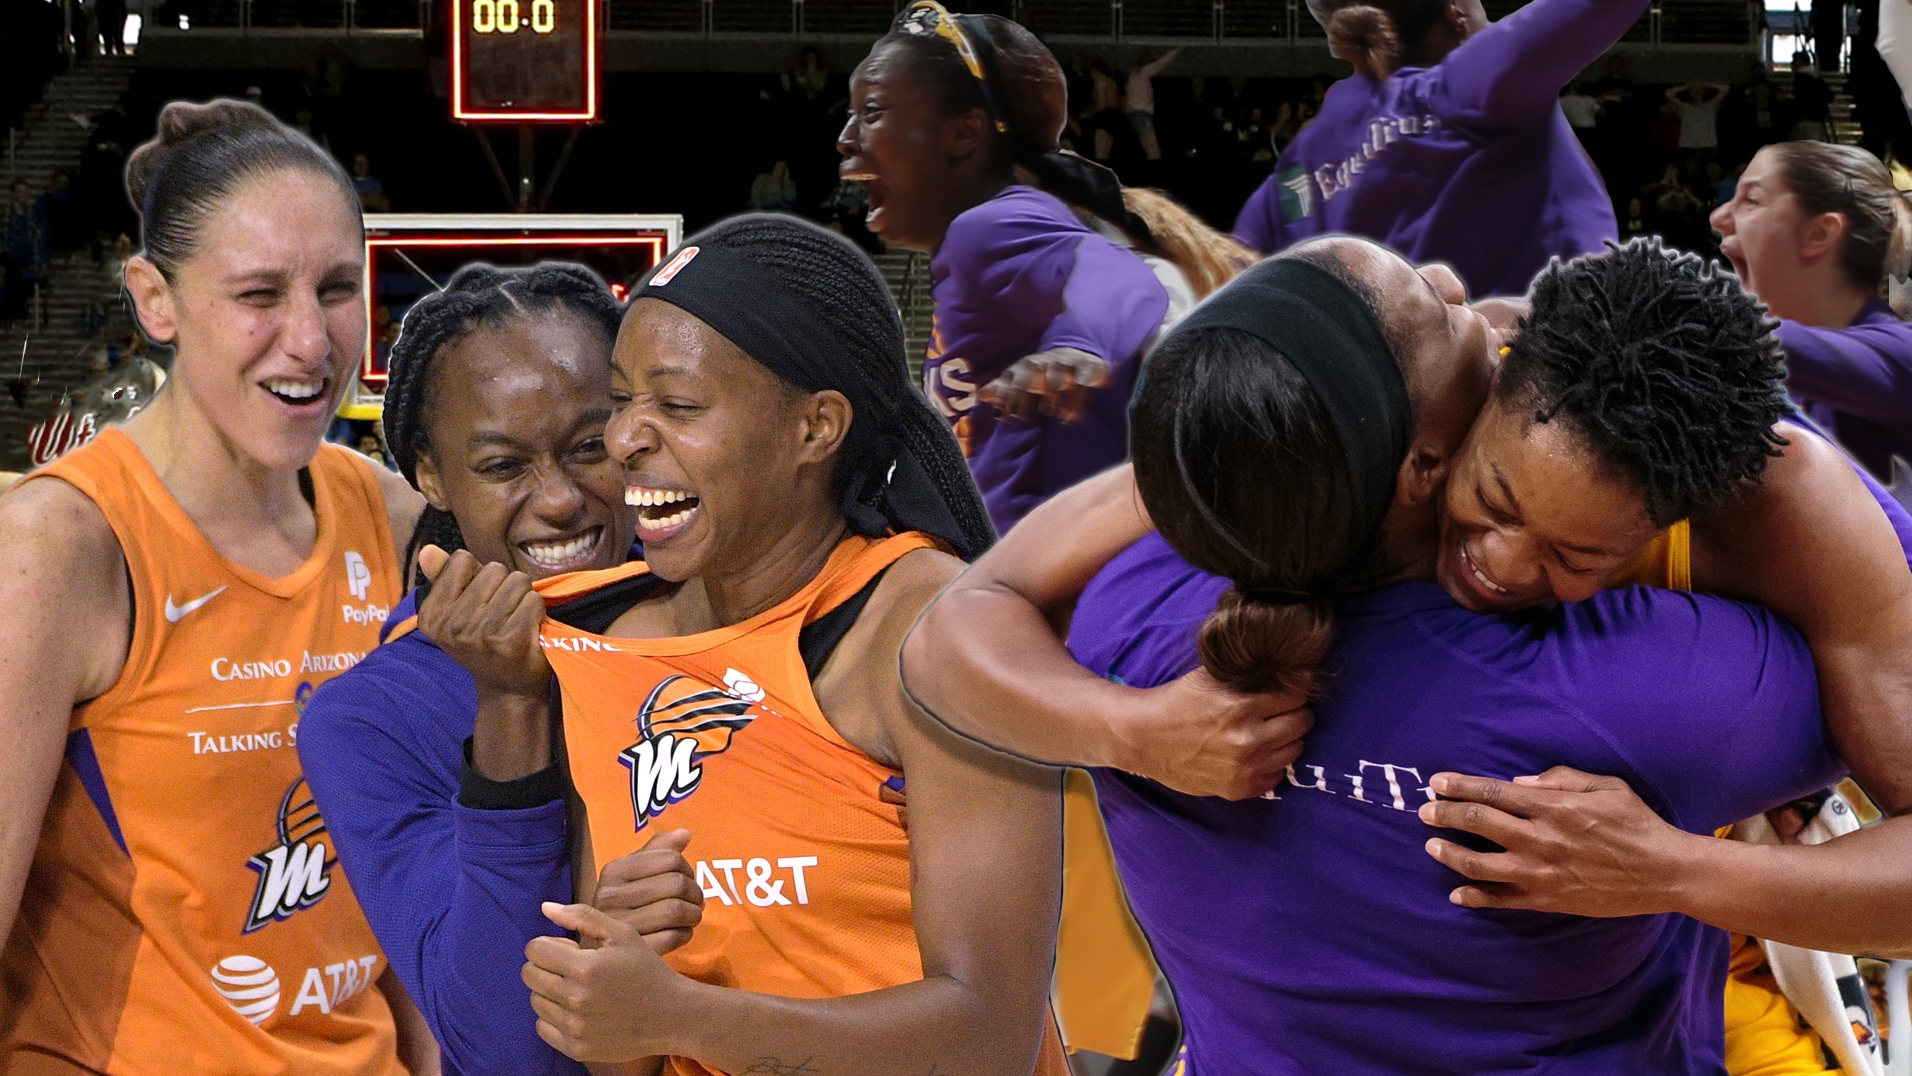 The most exhilarating finishes in WNBA playoff history